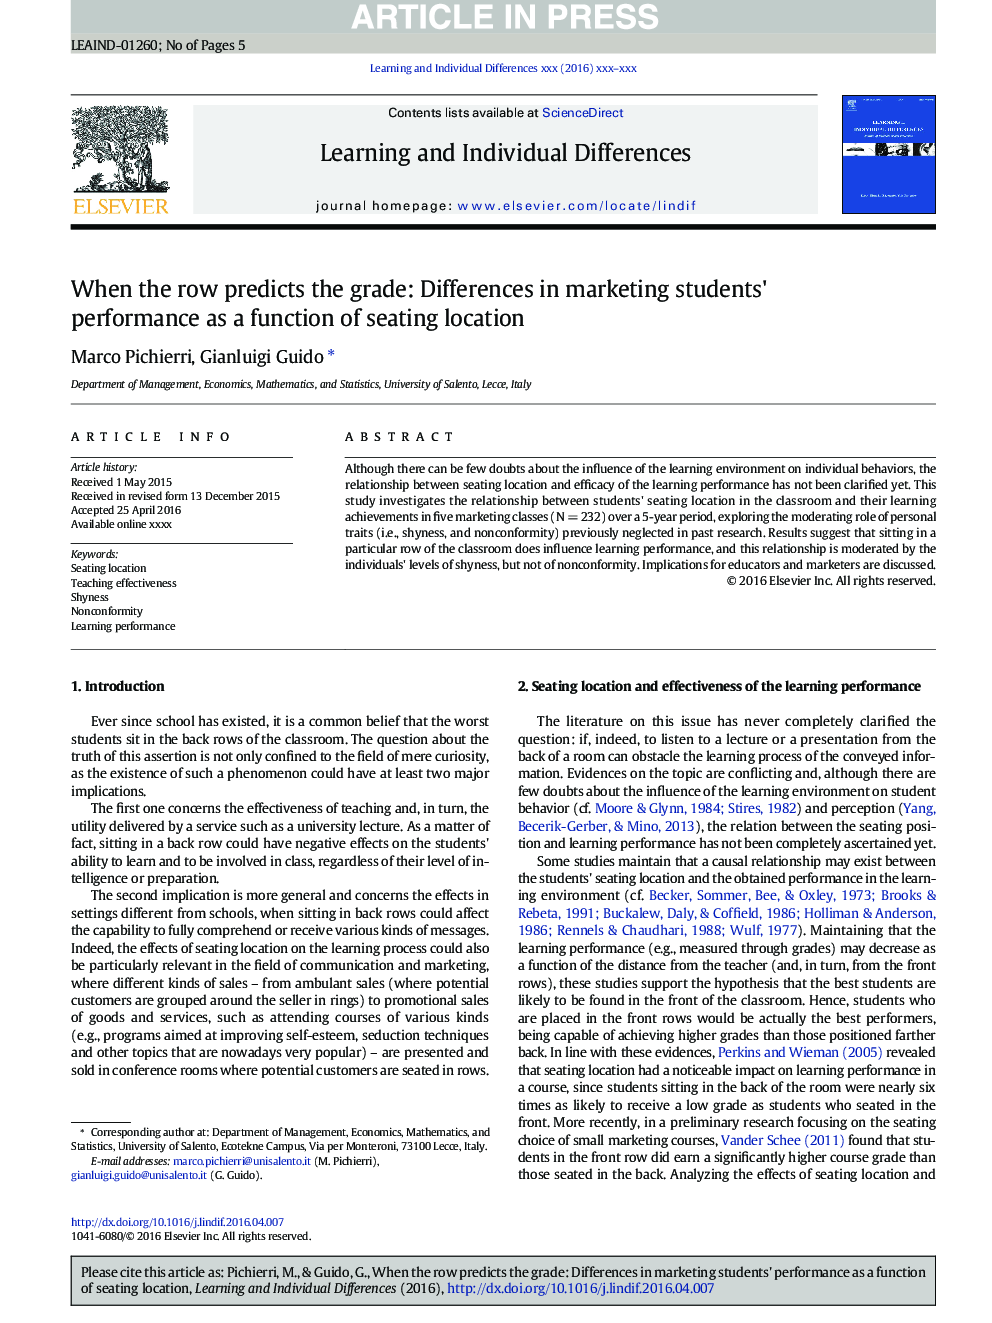 When the row predicts the grade: Differences in marketing students' performance as a function of seating location